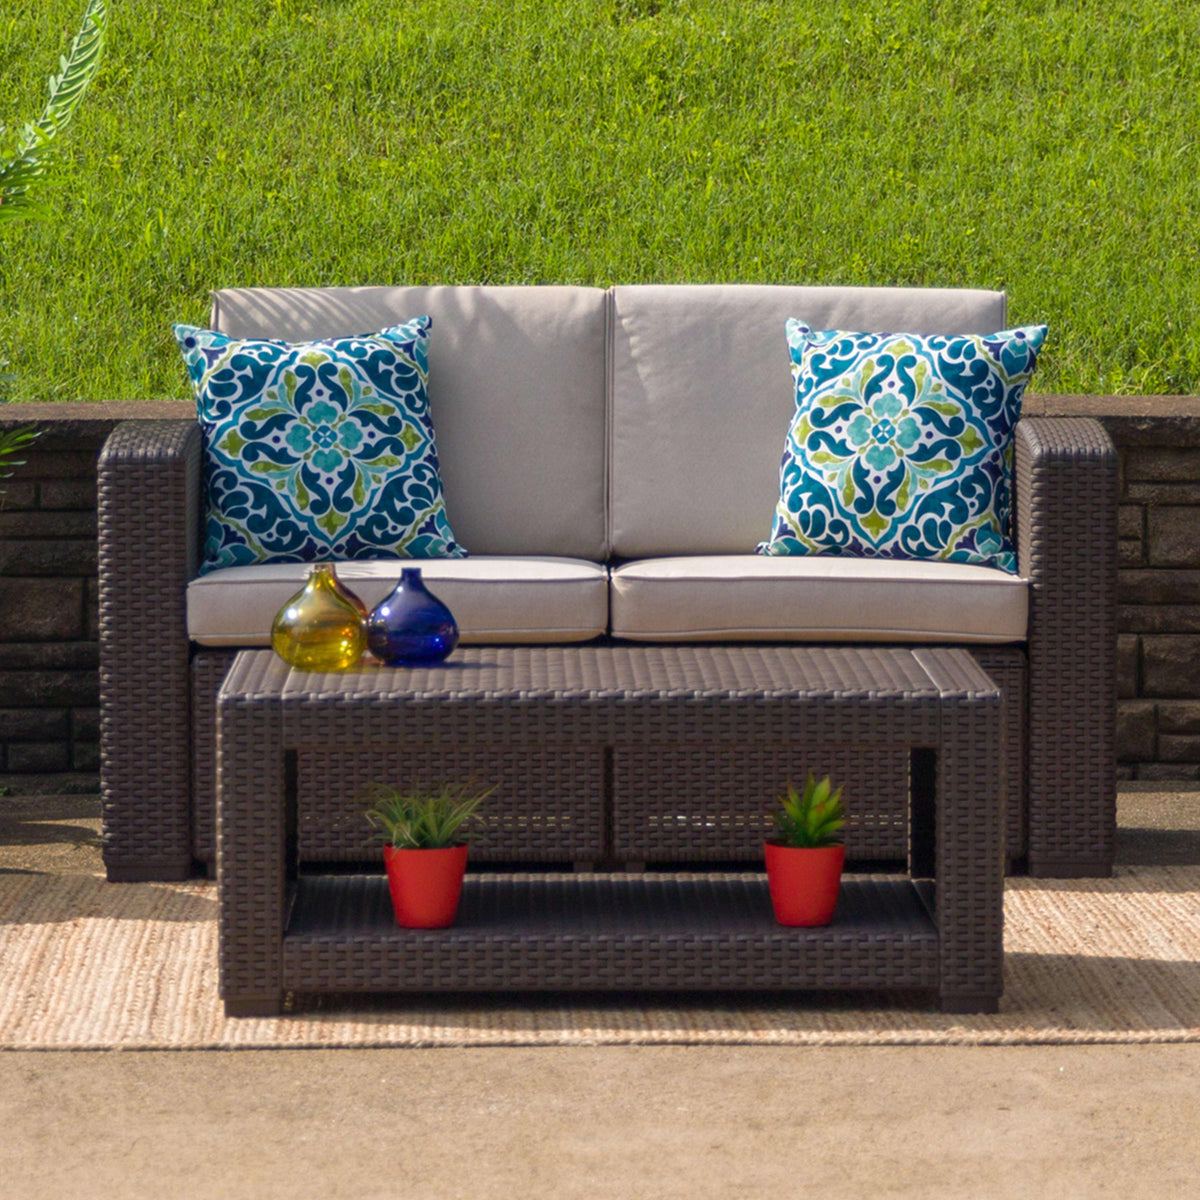 Chocolate Brown |#| Chocolate Brown Faux Rattan Loveseat with All-Weather Beige Cushions